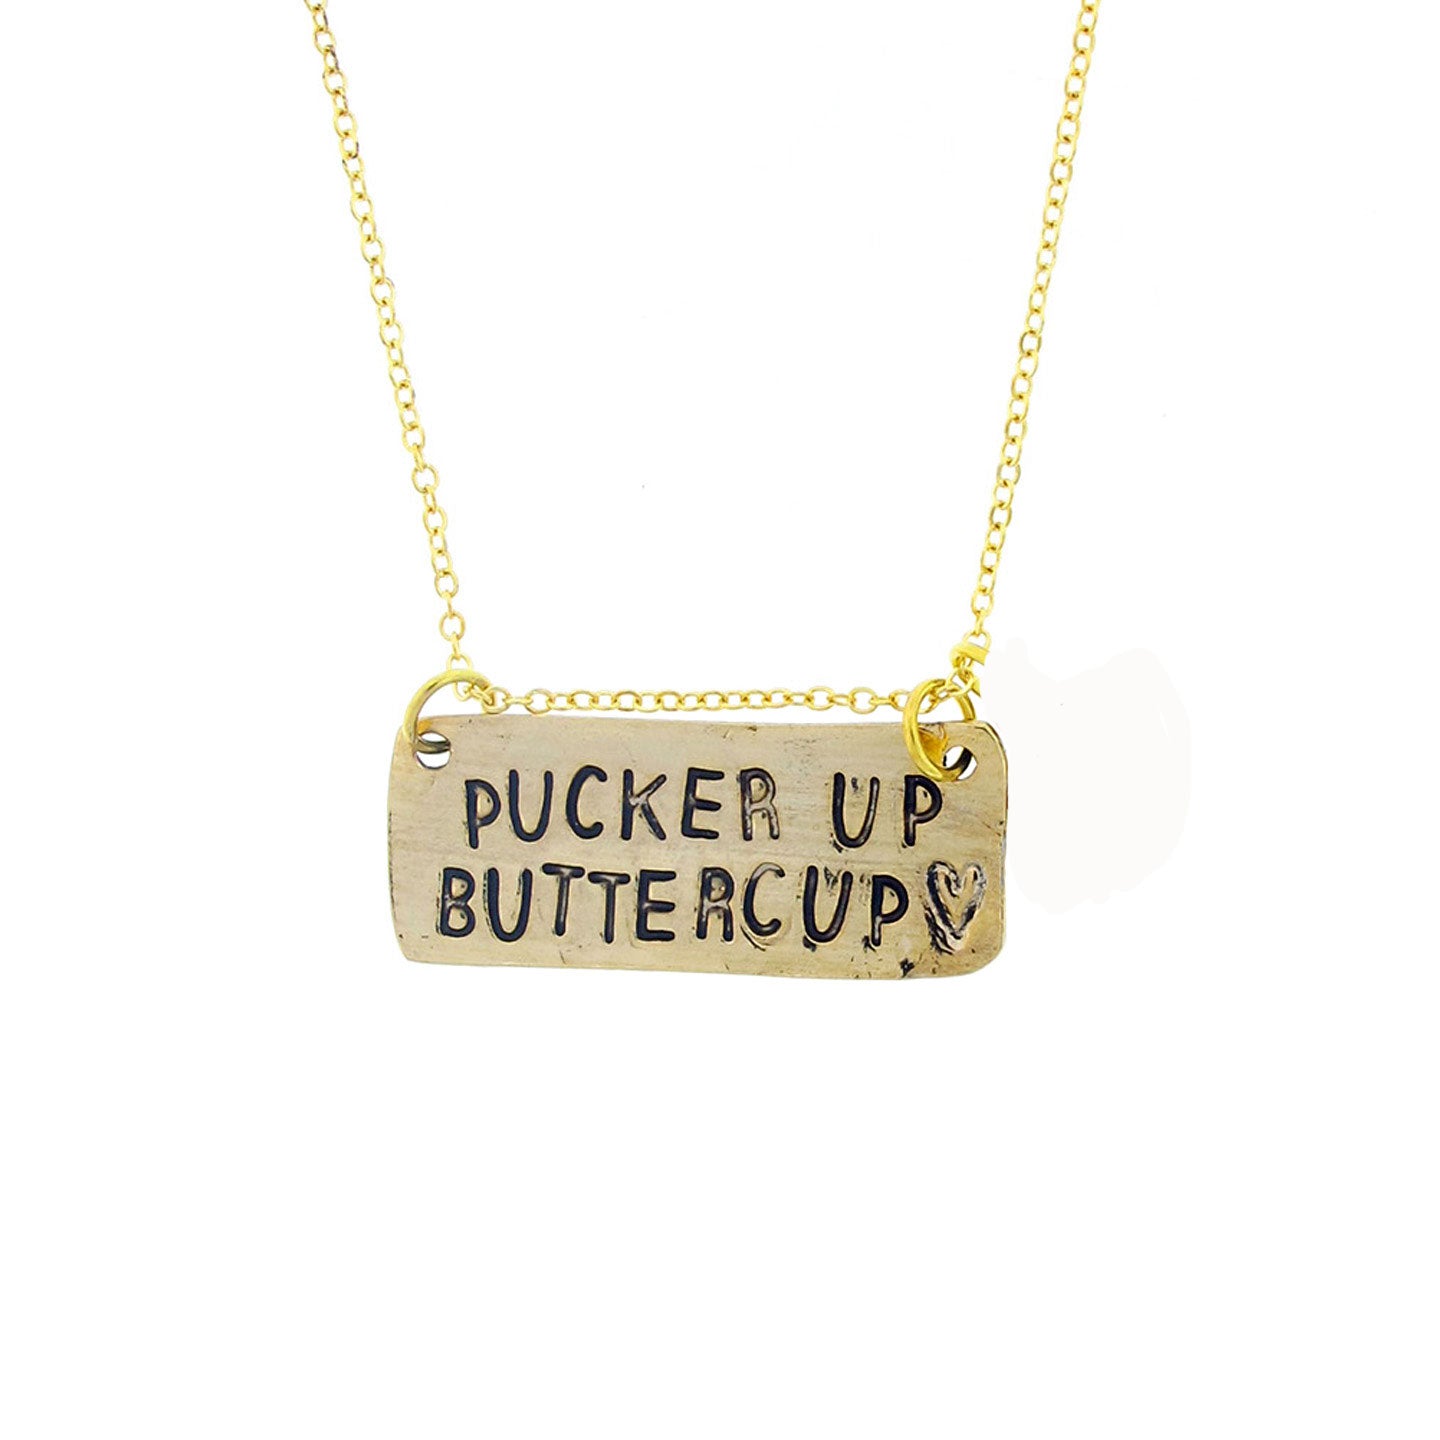 Pucker Up Buttercup Hand Stamped Necklace